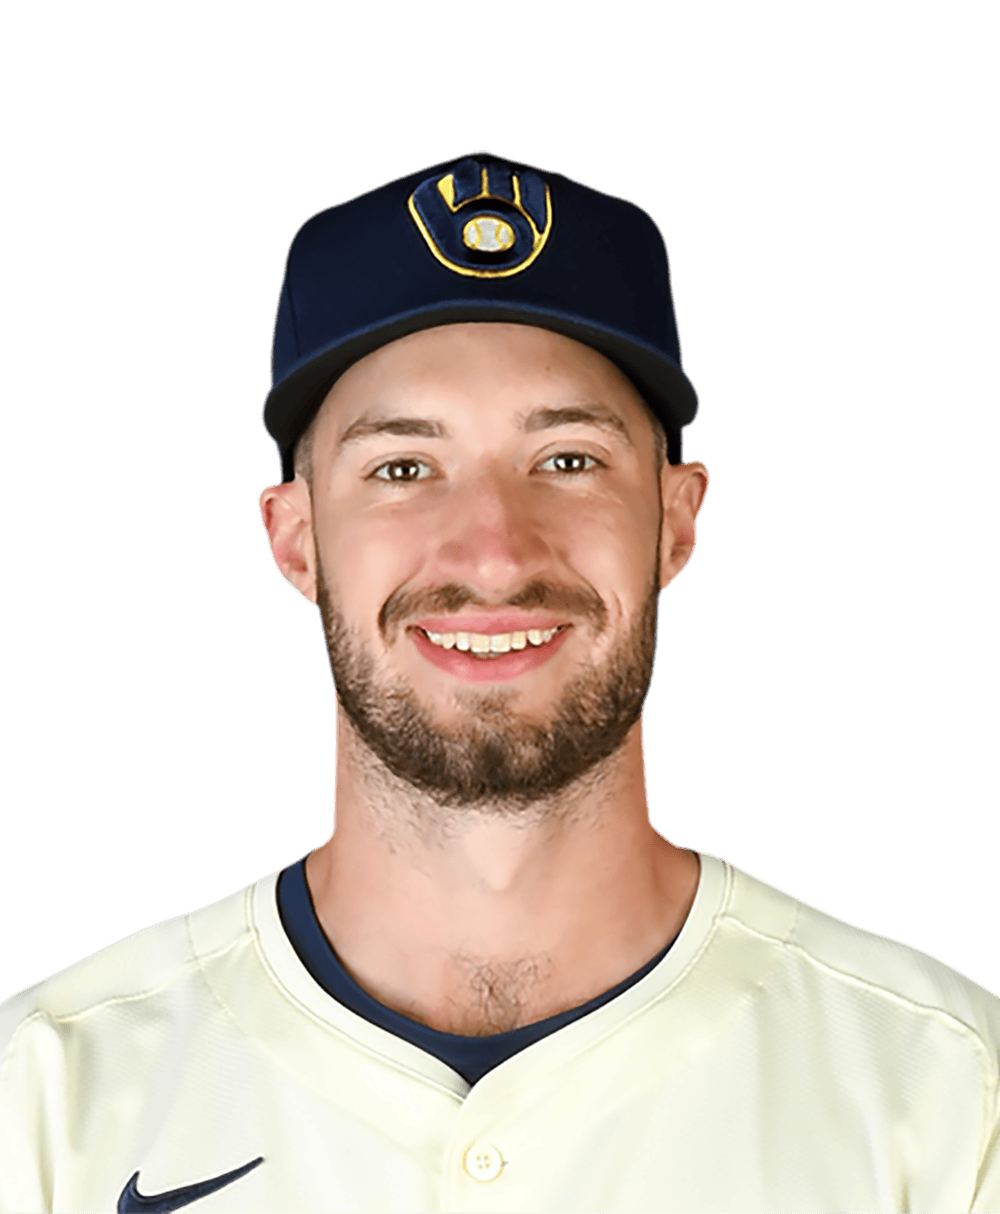 Milwaukee Brewers: Aaron Ashby To Undergo Shoulder Surgery